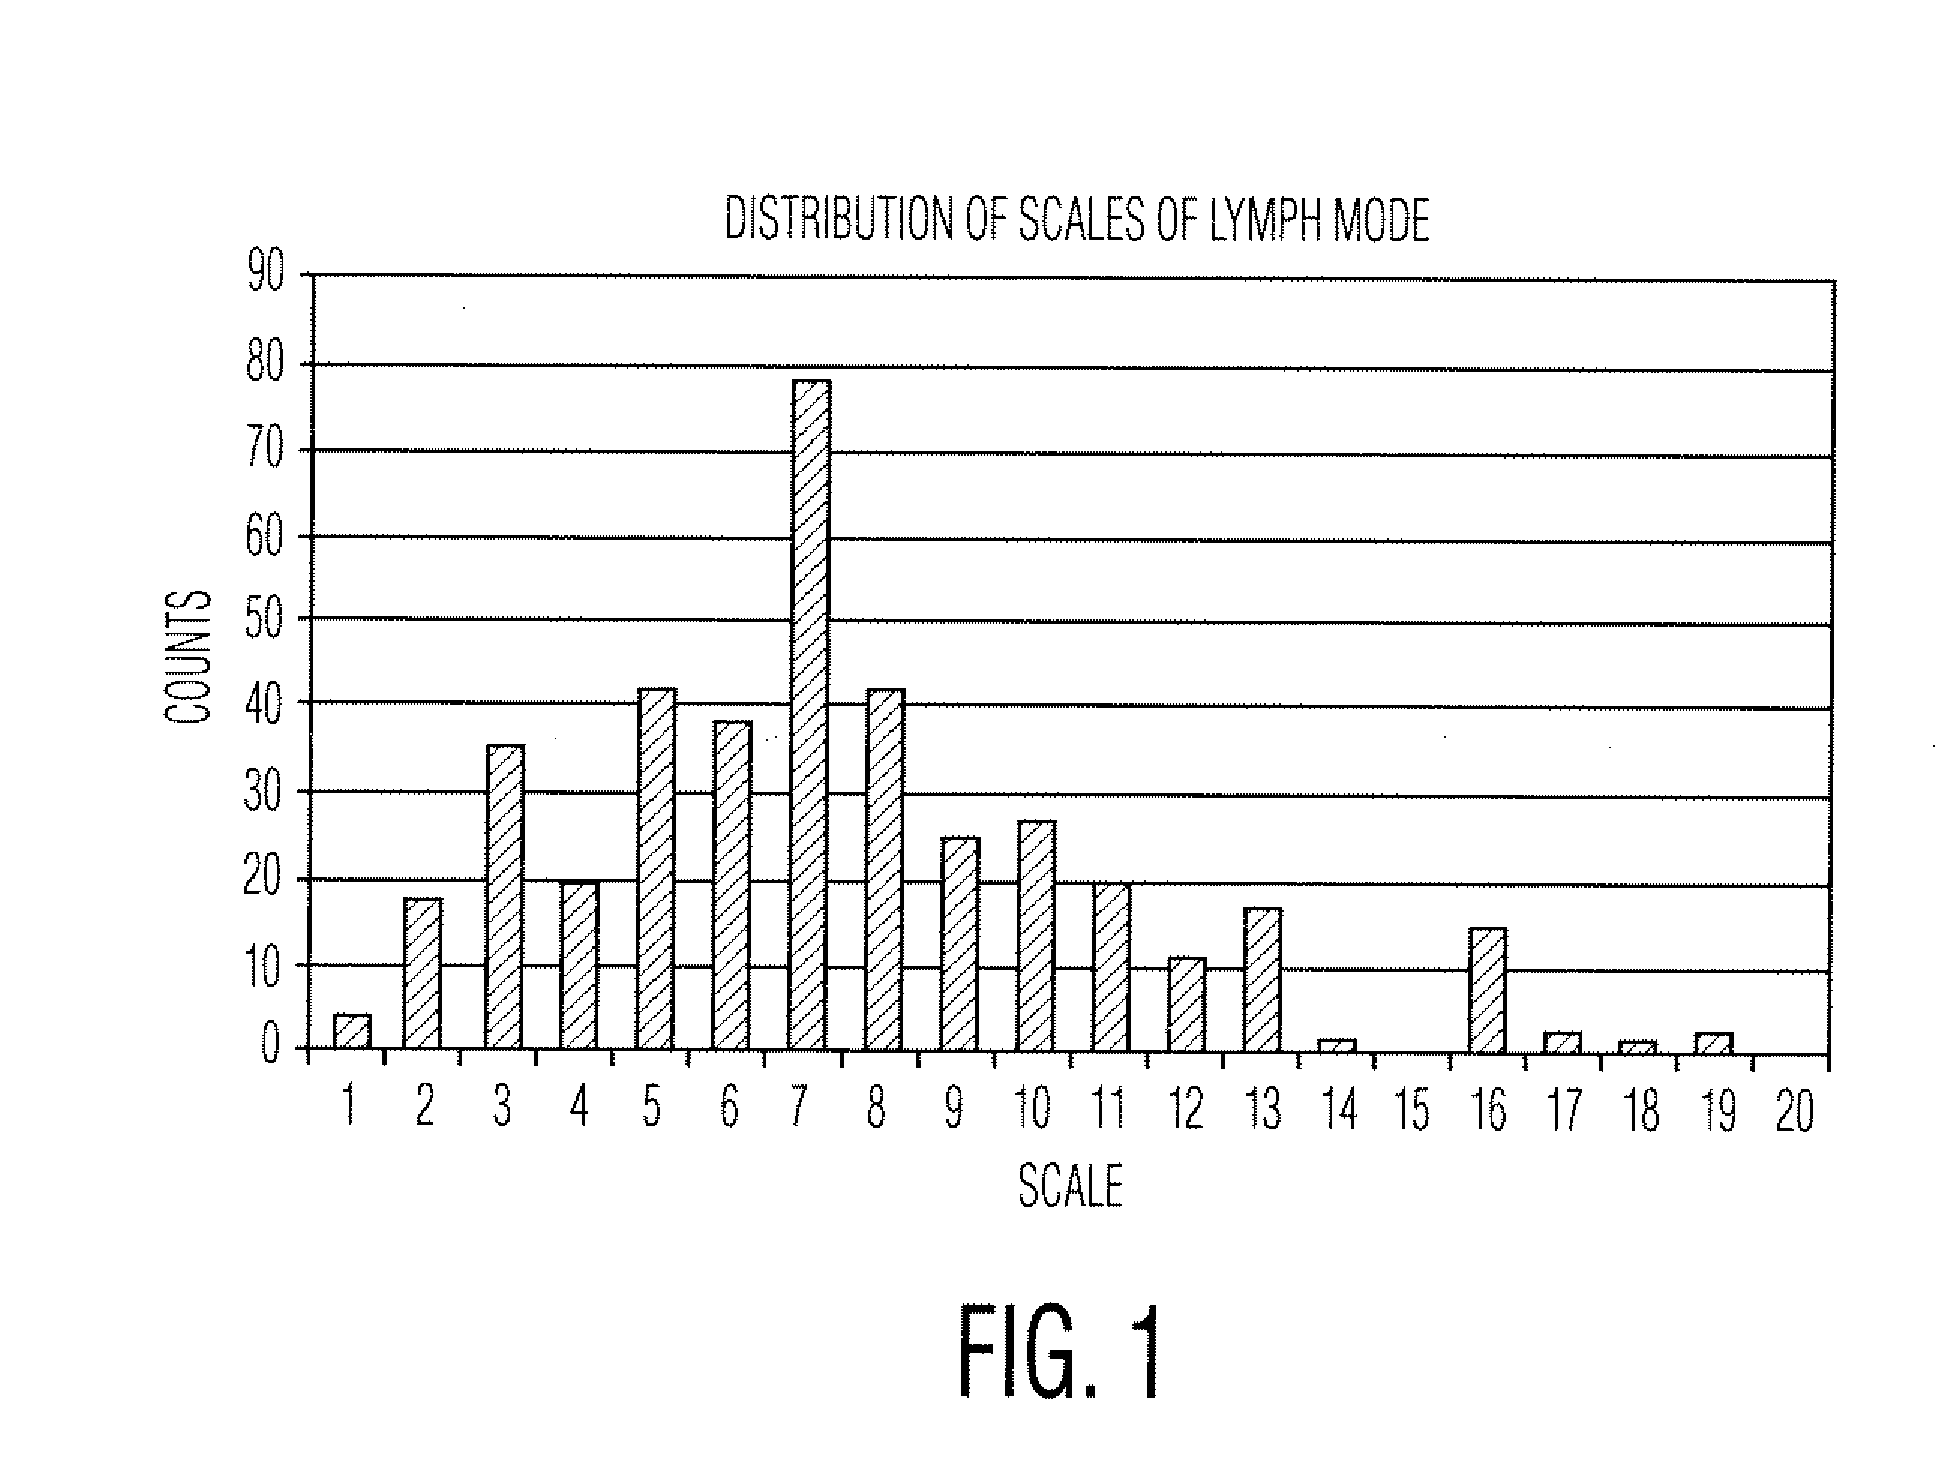 Method and System for Object Detection Using Probabilistic Boosting Cascade Tree